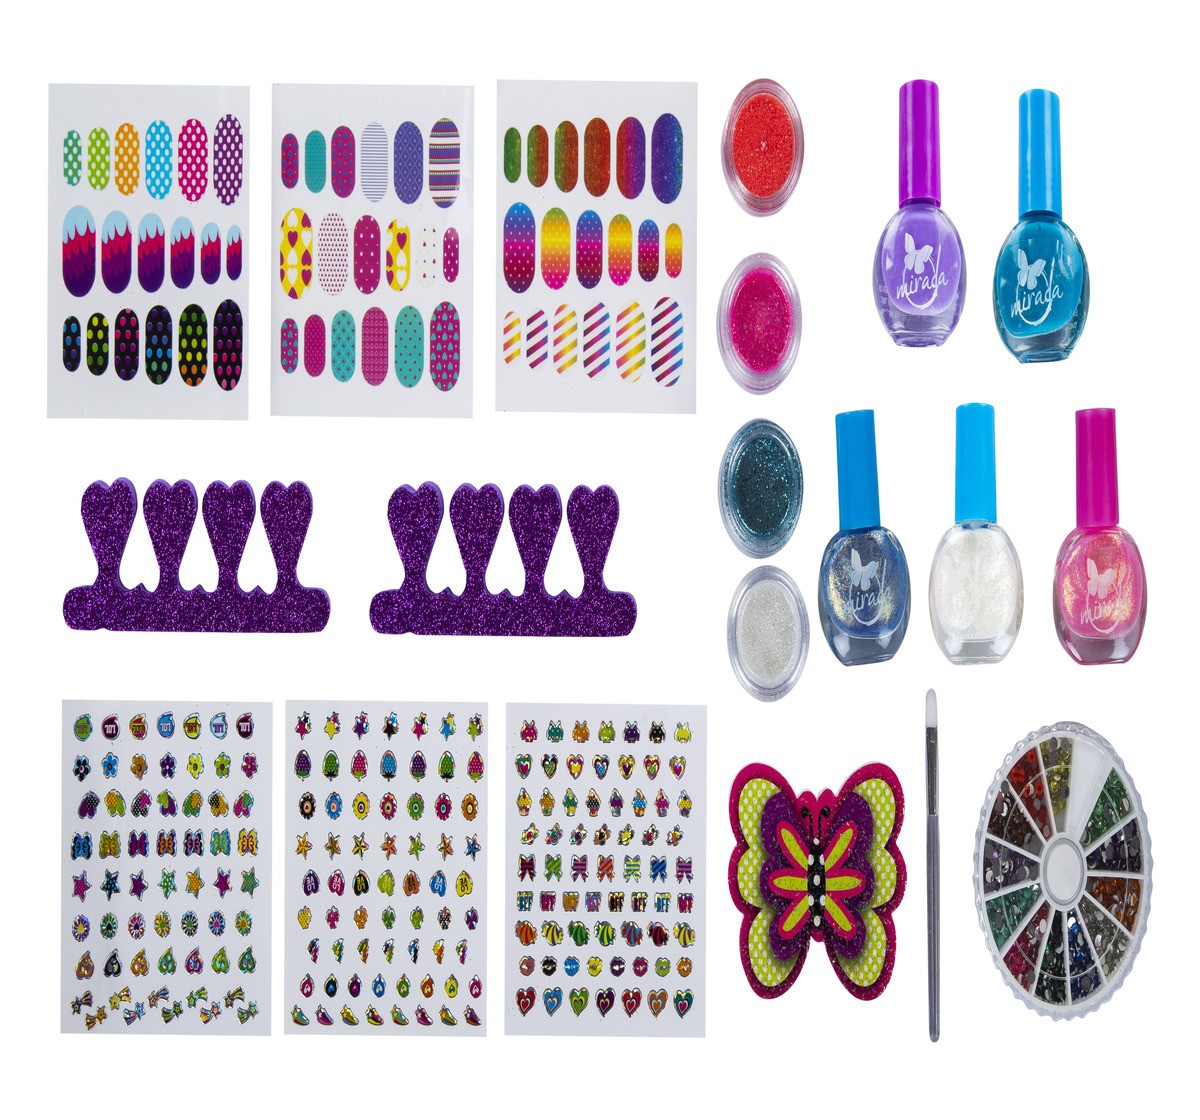 Mirada Manicure Magic Party DIY Art & Craft Kits for Kids age 5Y+ 